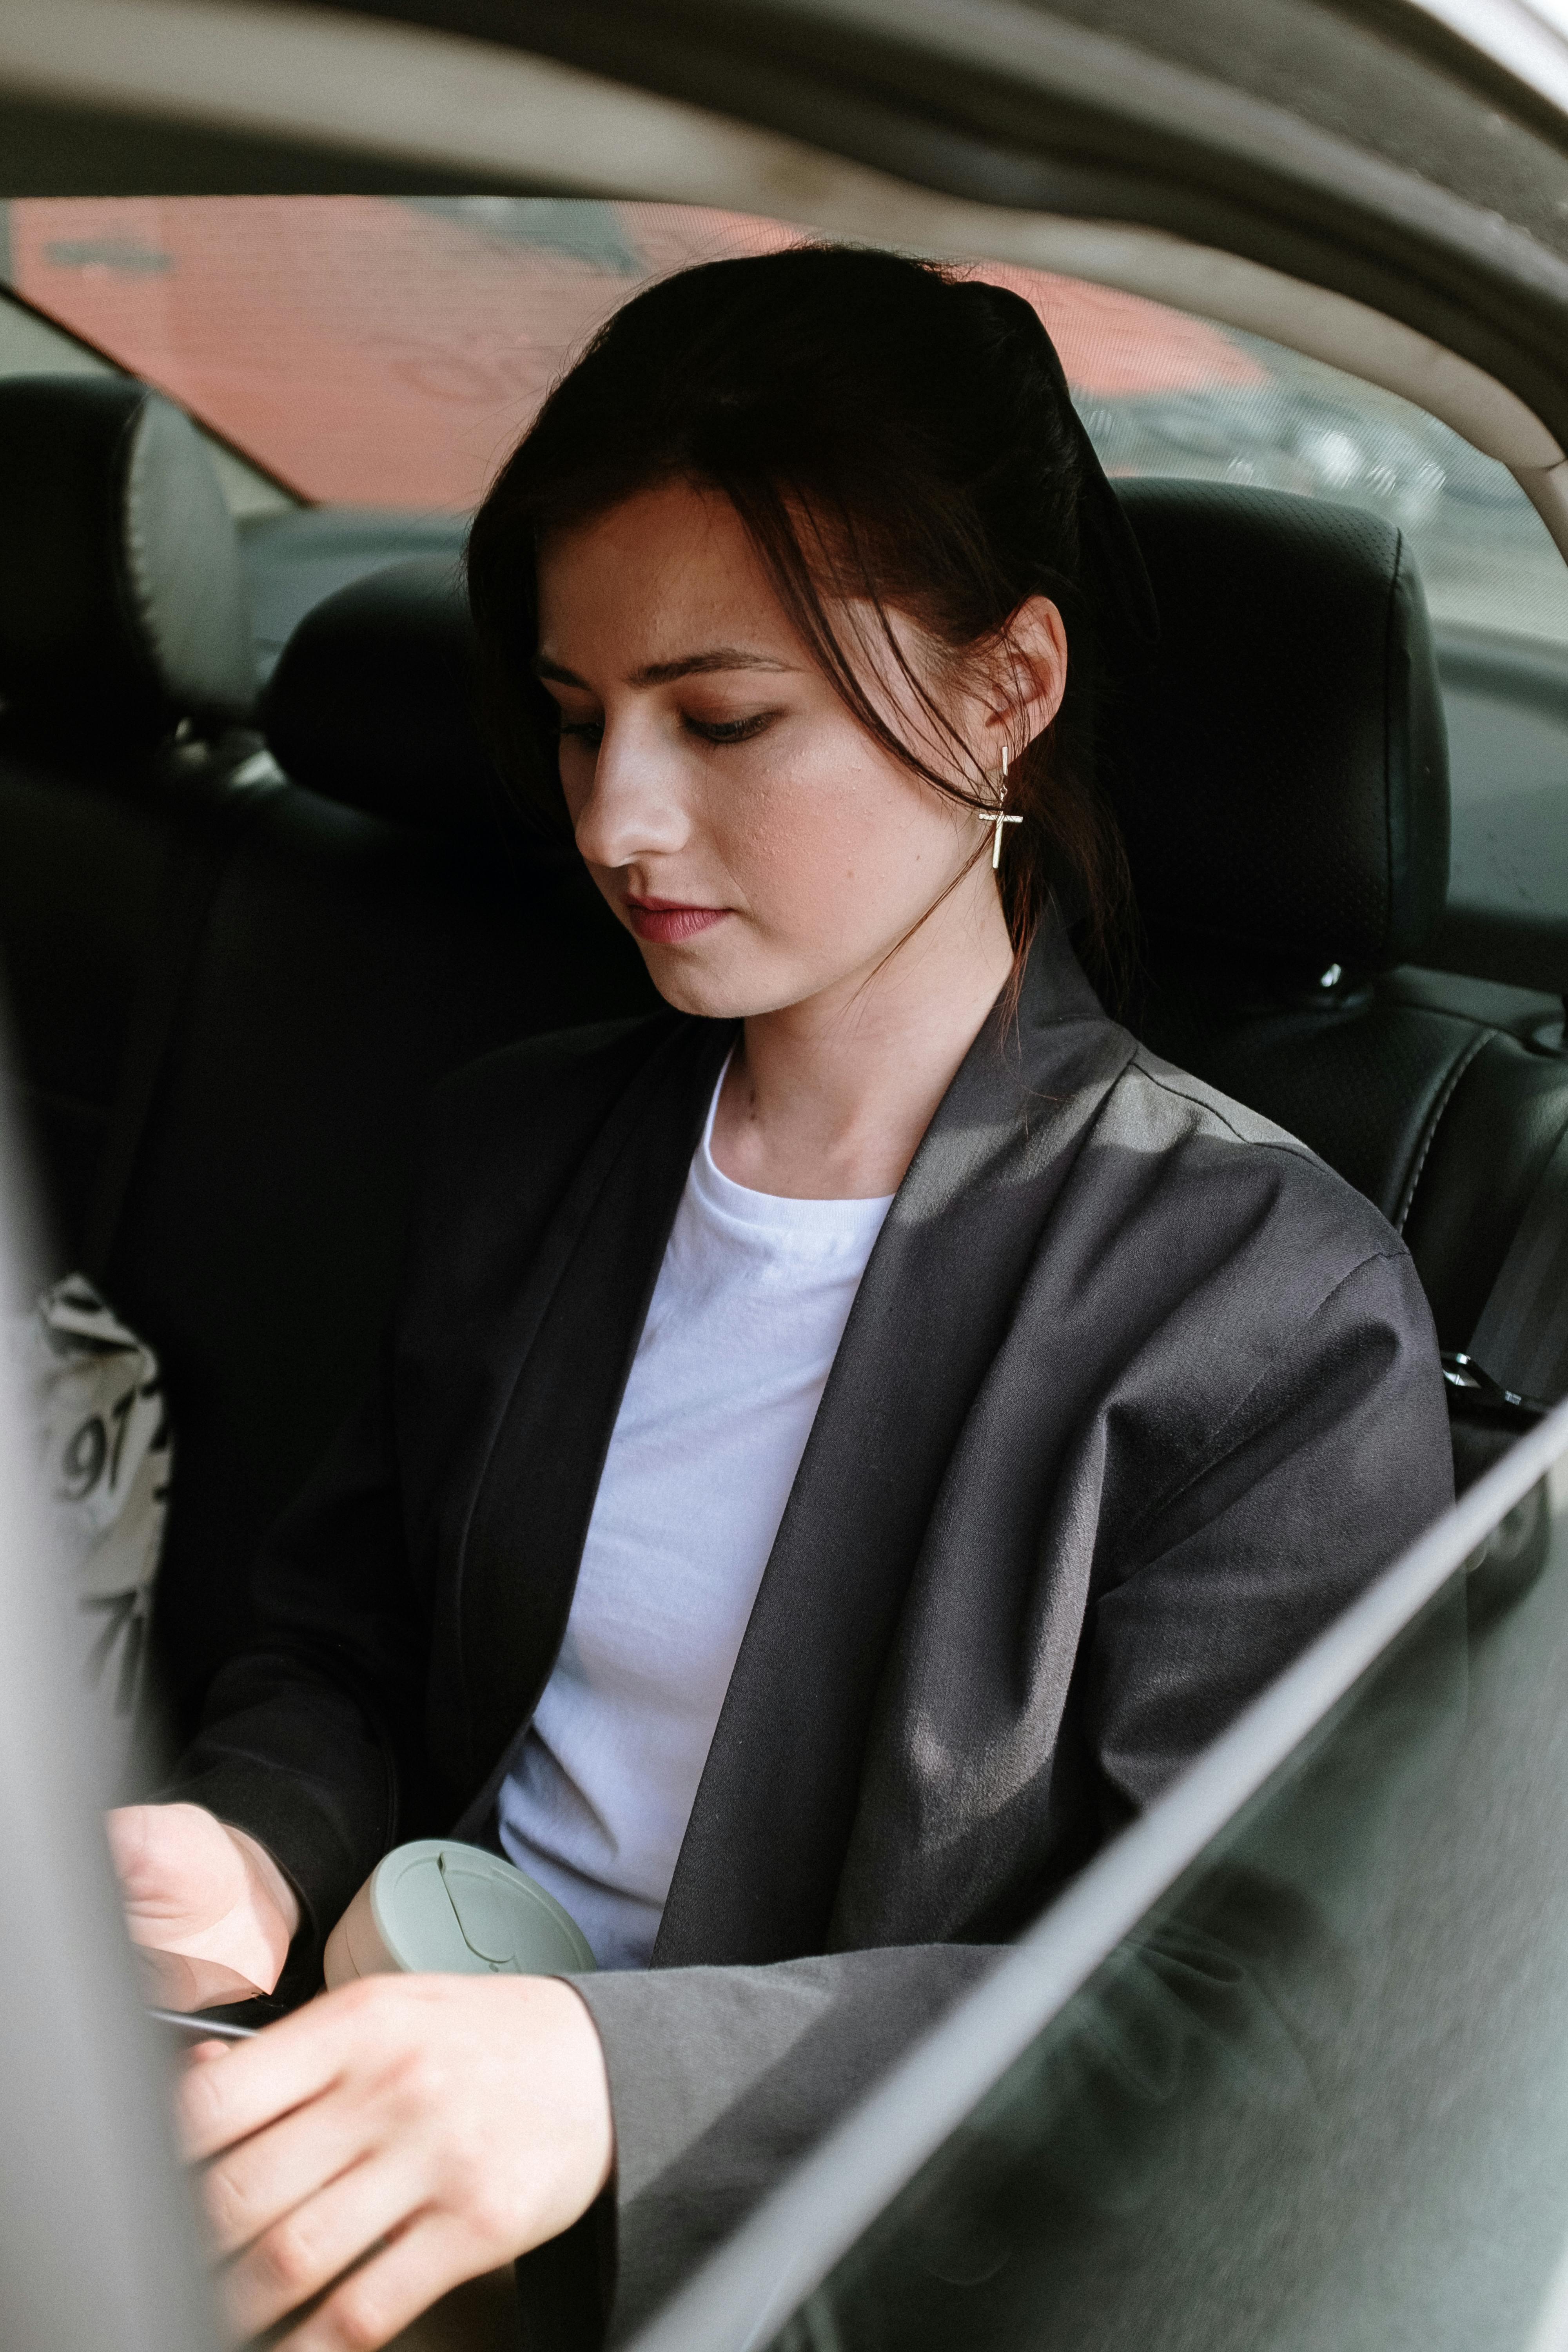 An unhappy-looking woman looking at something while in a car | Source: Pexels